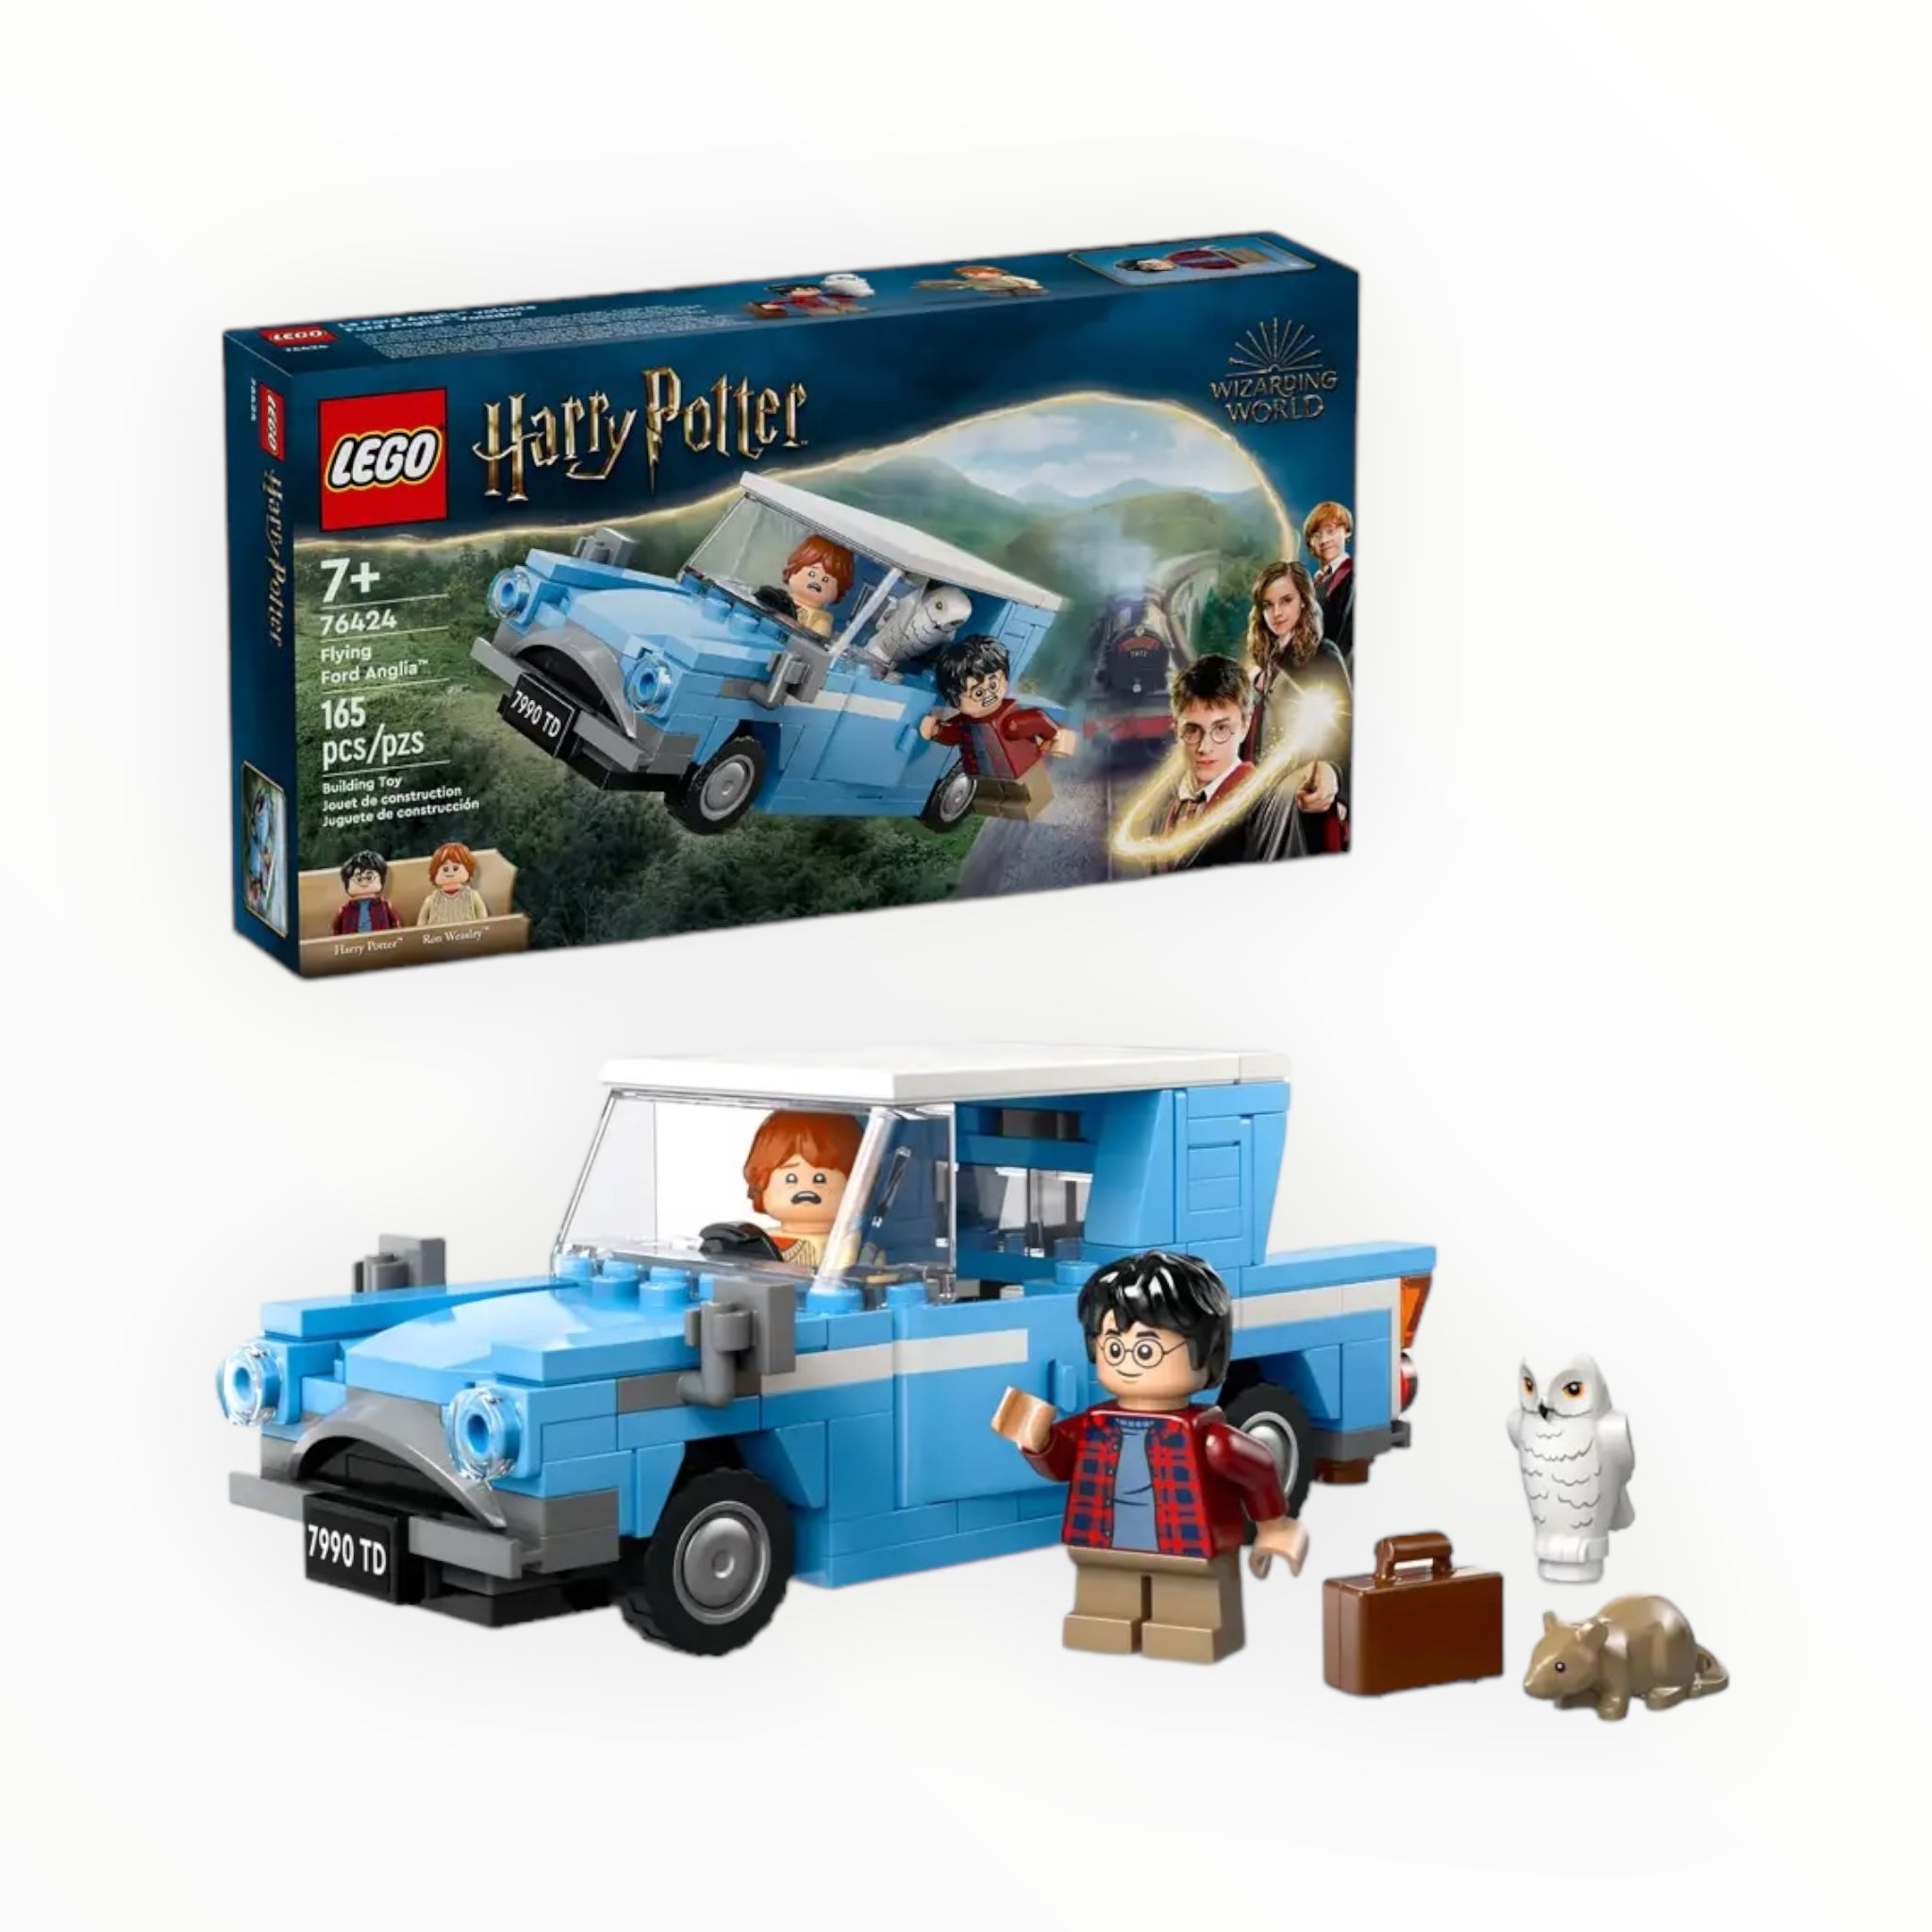 76424 Harry Potter Flying Ford Anglia